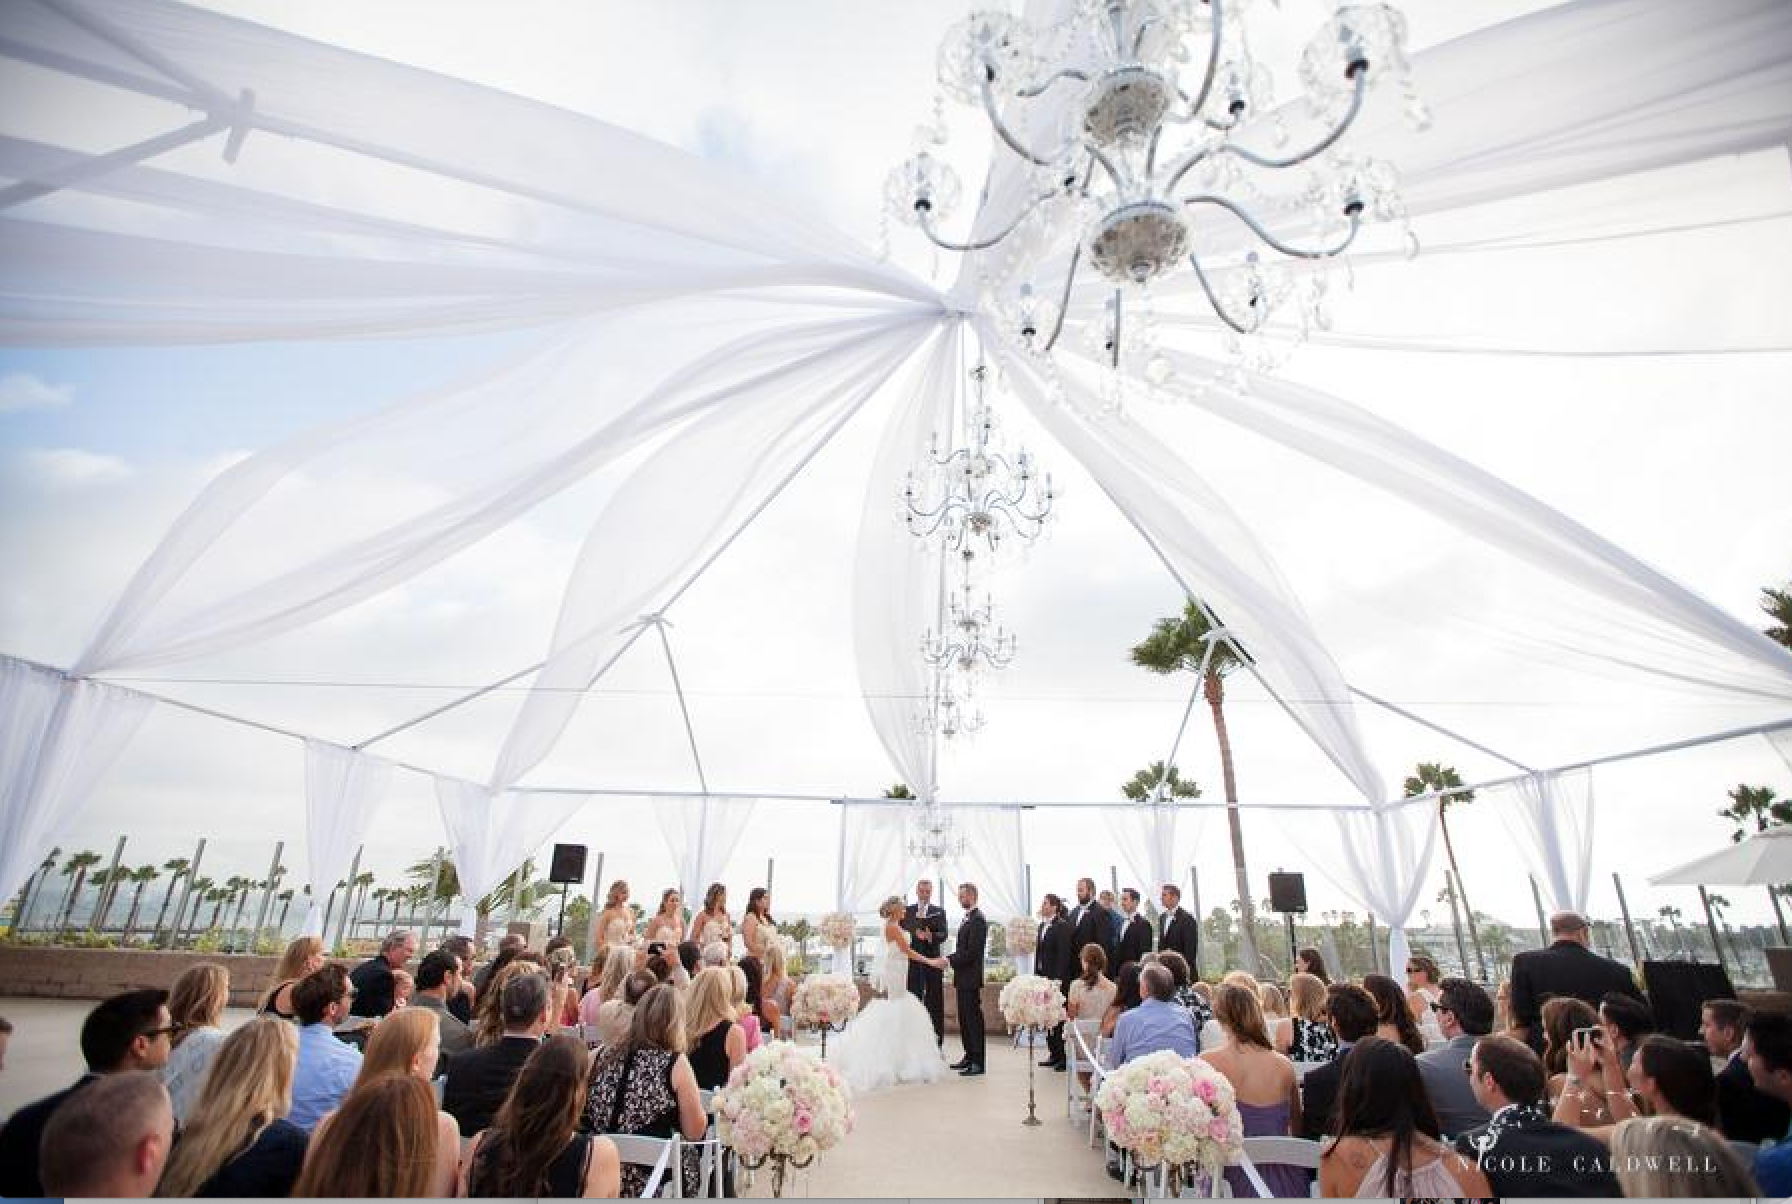 Protect your Wedding From Wind: An Outdoor Wedding’s Biggest Challenge